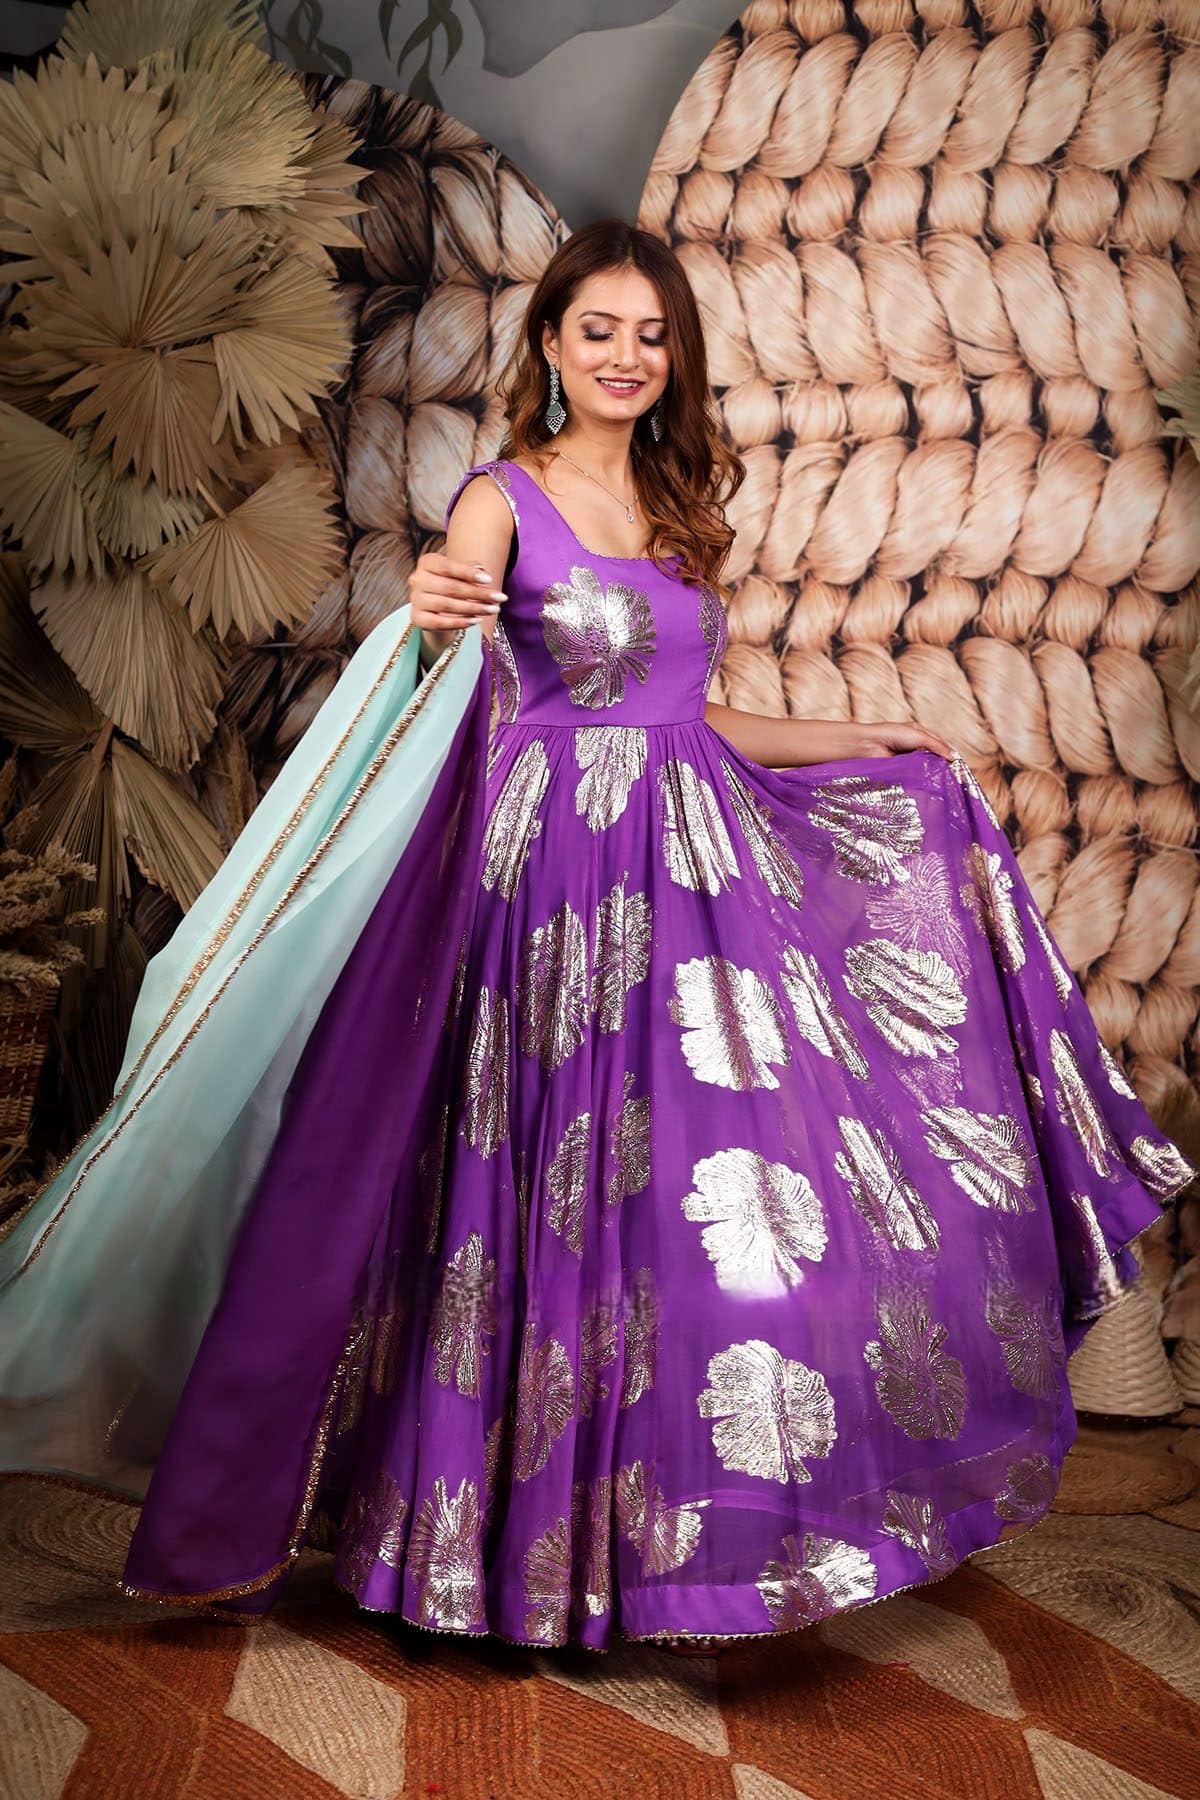 Lilac Stunning Anarkali Long Partywear Gown with Dupatta in Jacquard Georgette fabric latest design SLEEVELESS 56 inches long Perfect dress in